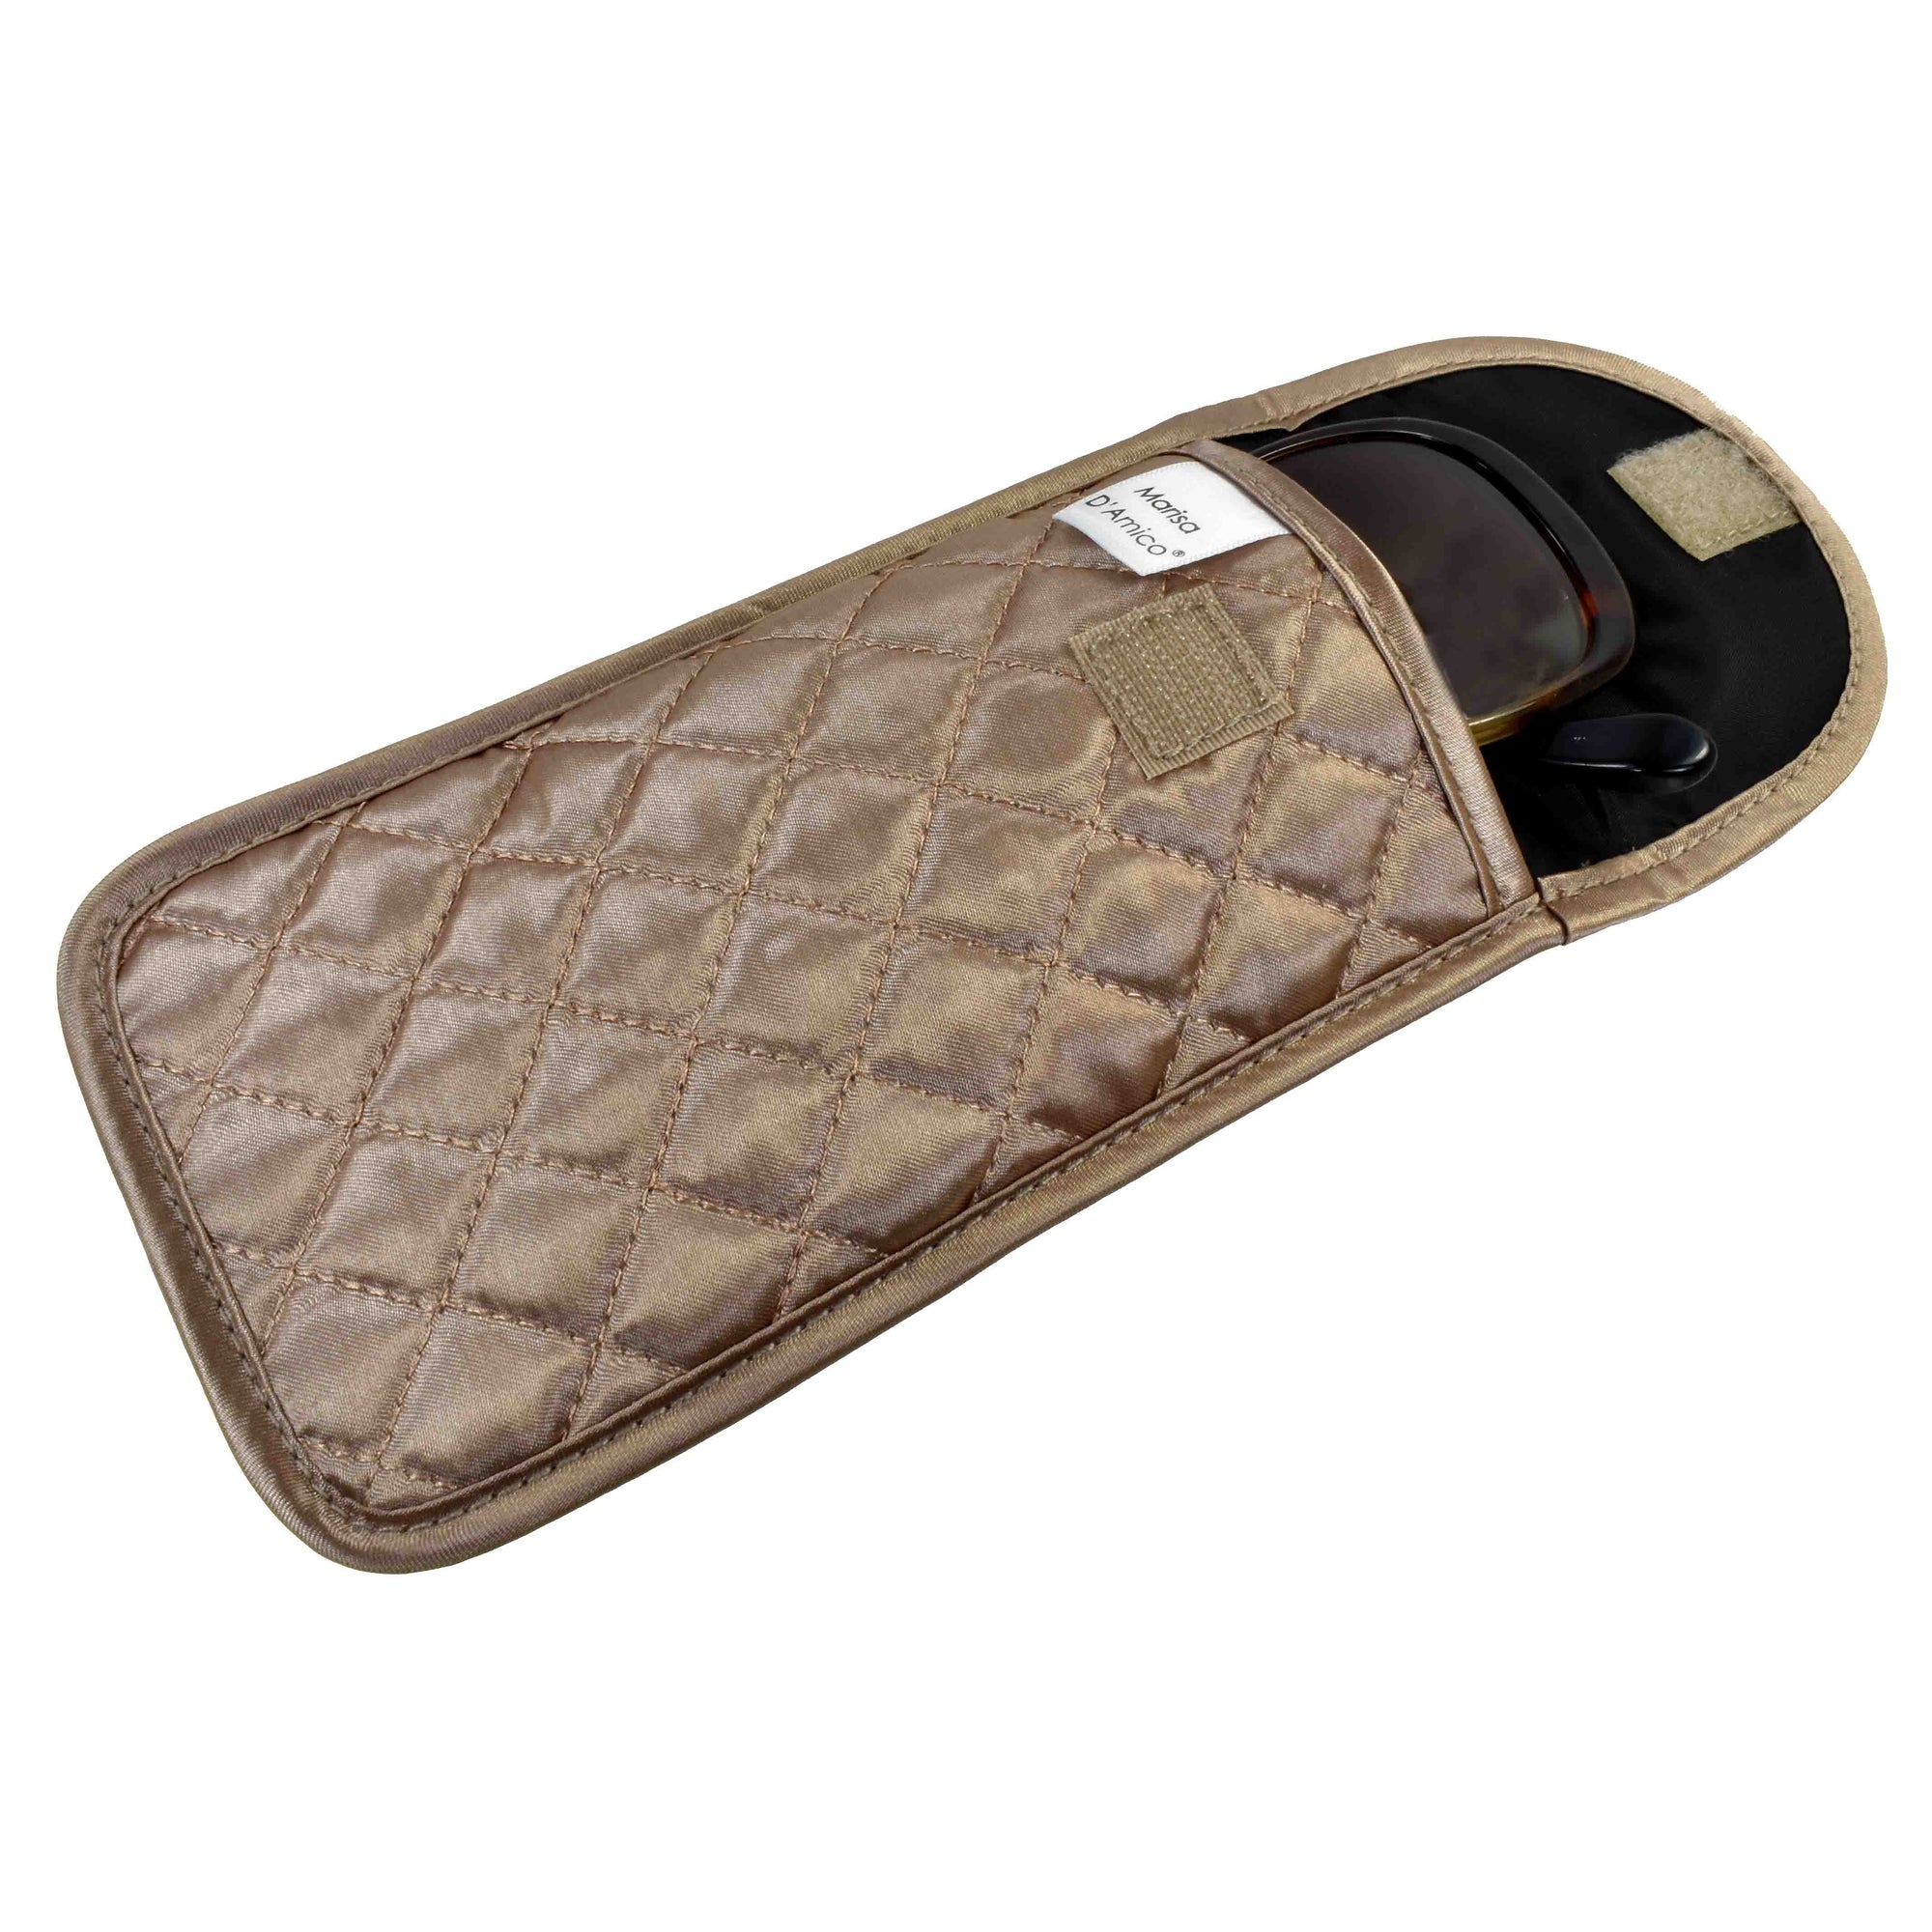 Quilted Satin Soft Eyeglass Pouch with Velcro Flap Closure in Bronze, Open View